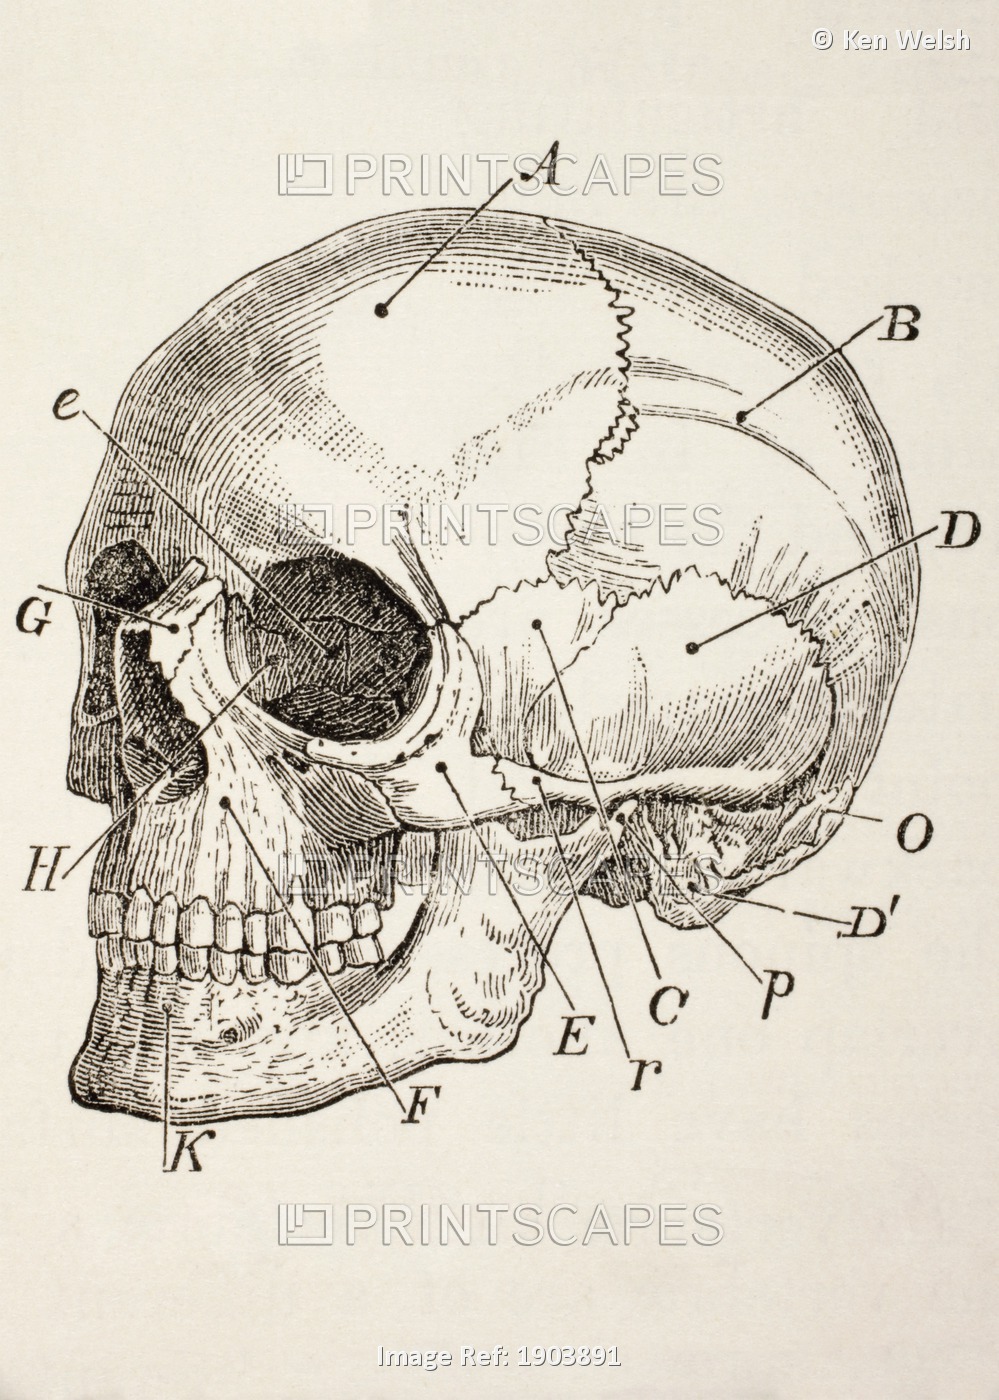 The Human Skull. From The Household Physician, Published Circa 1890.